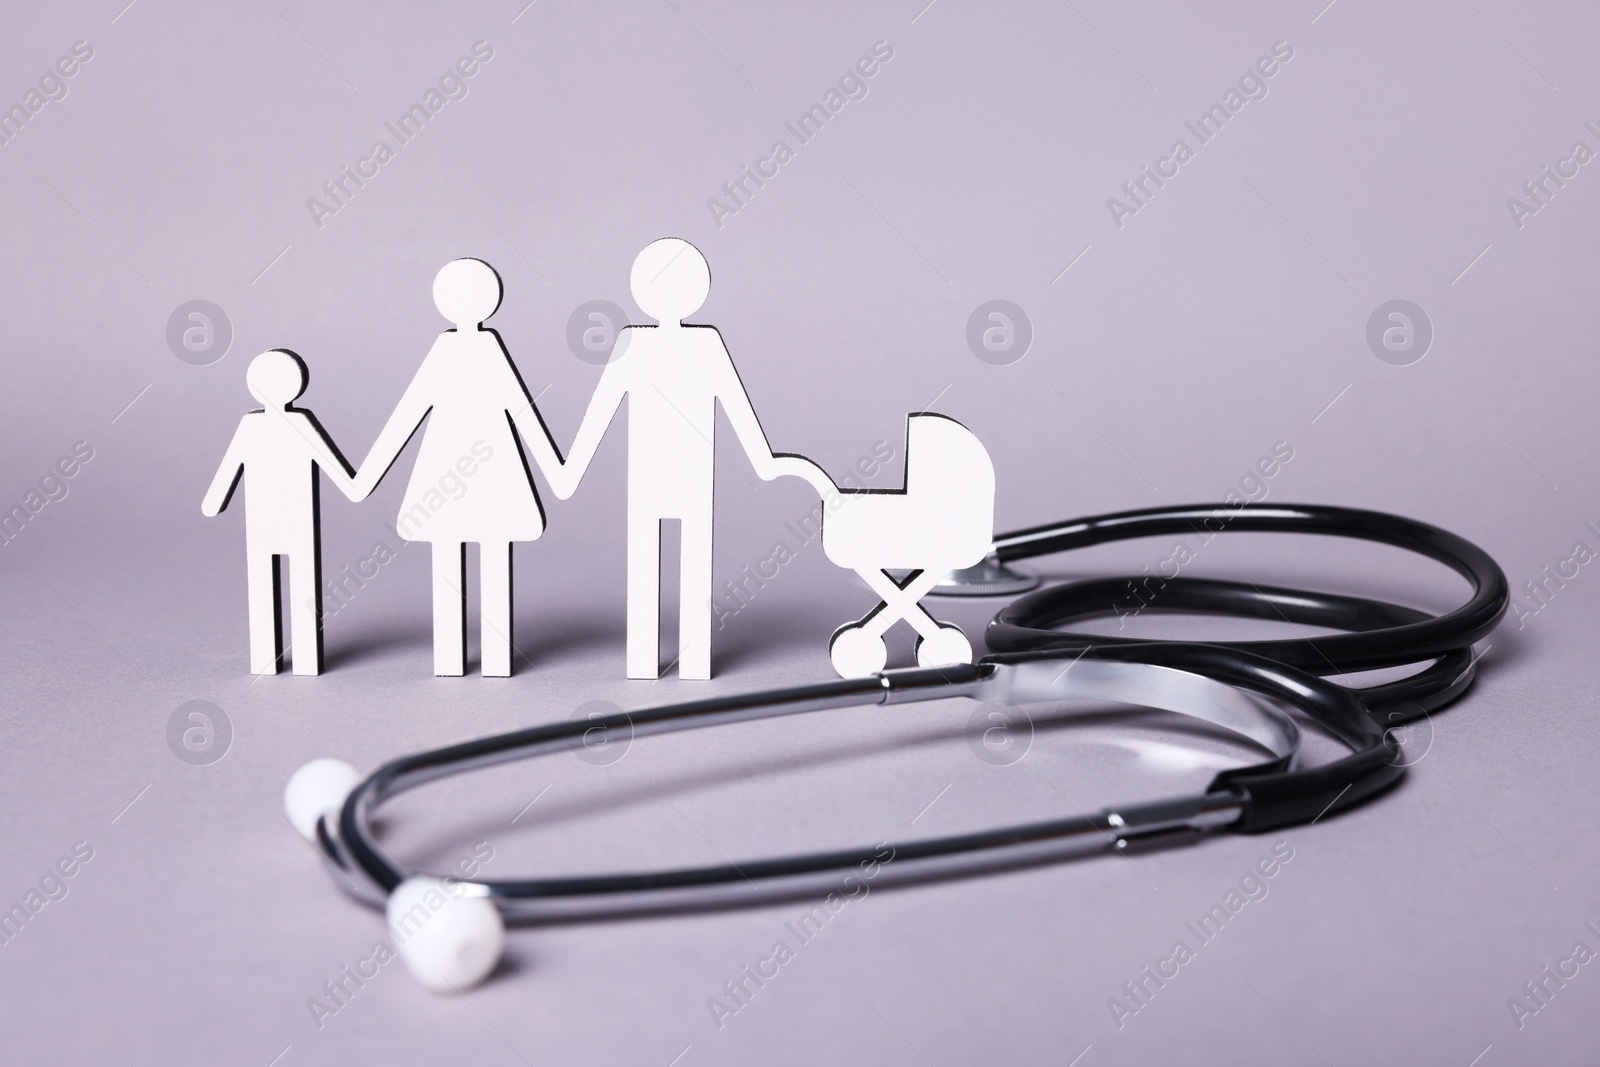 Photo of Figures of family stainding near stethoscope on lilac background. Insurance concept